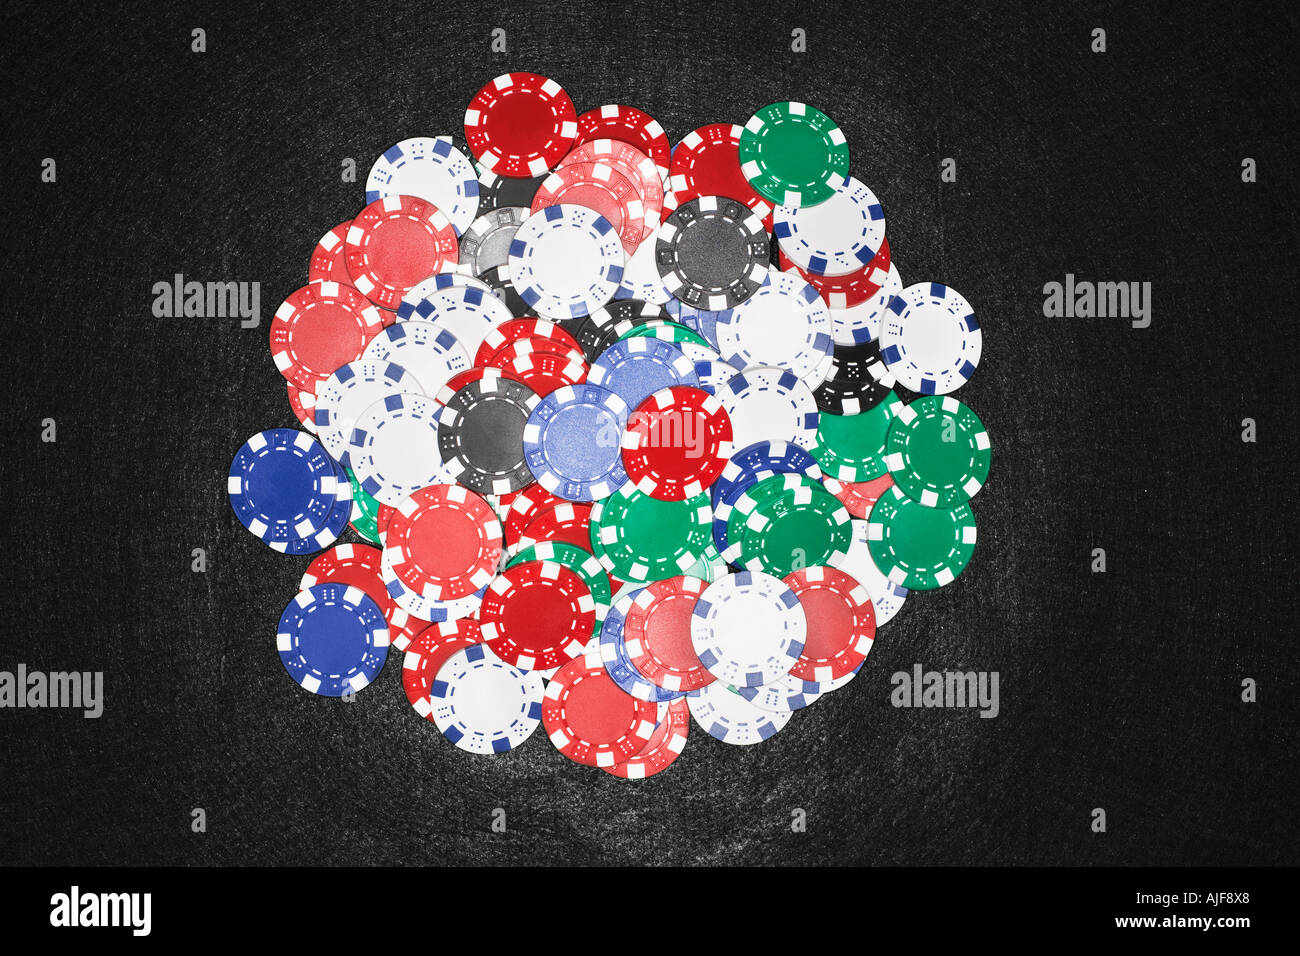 Pile of gambling chips, view from above Stock Photo